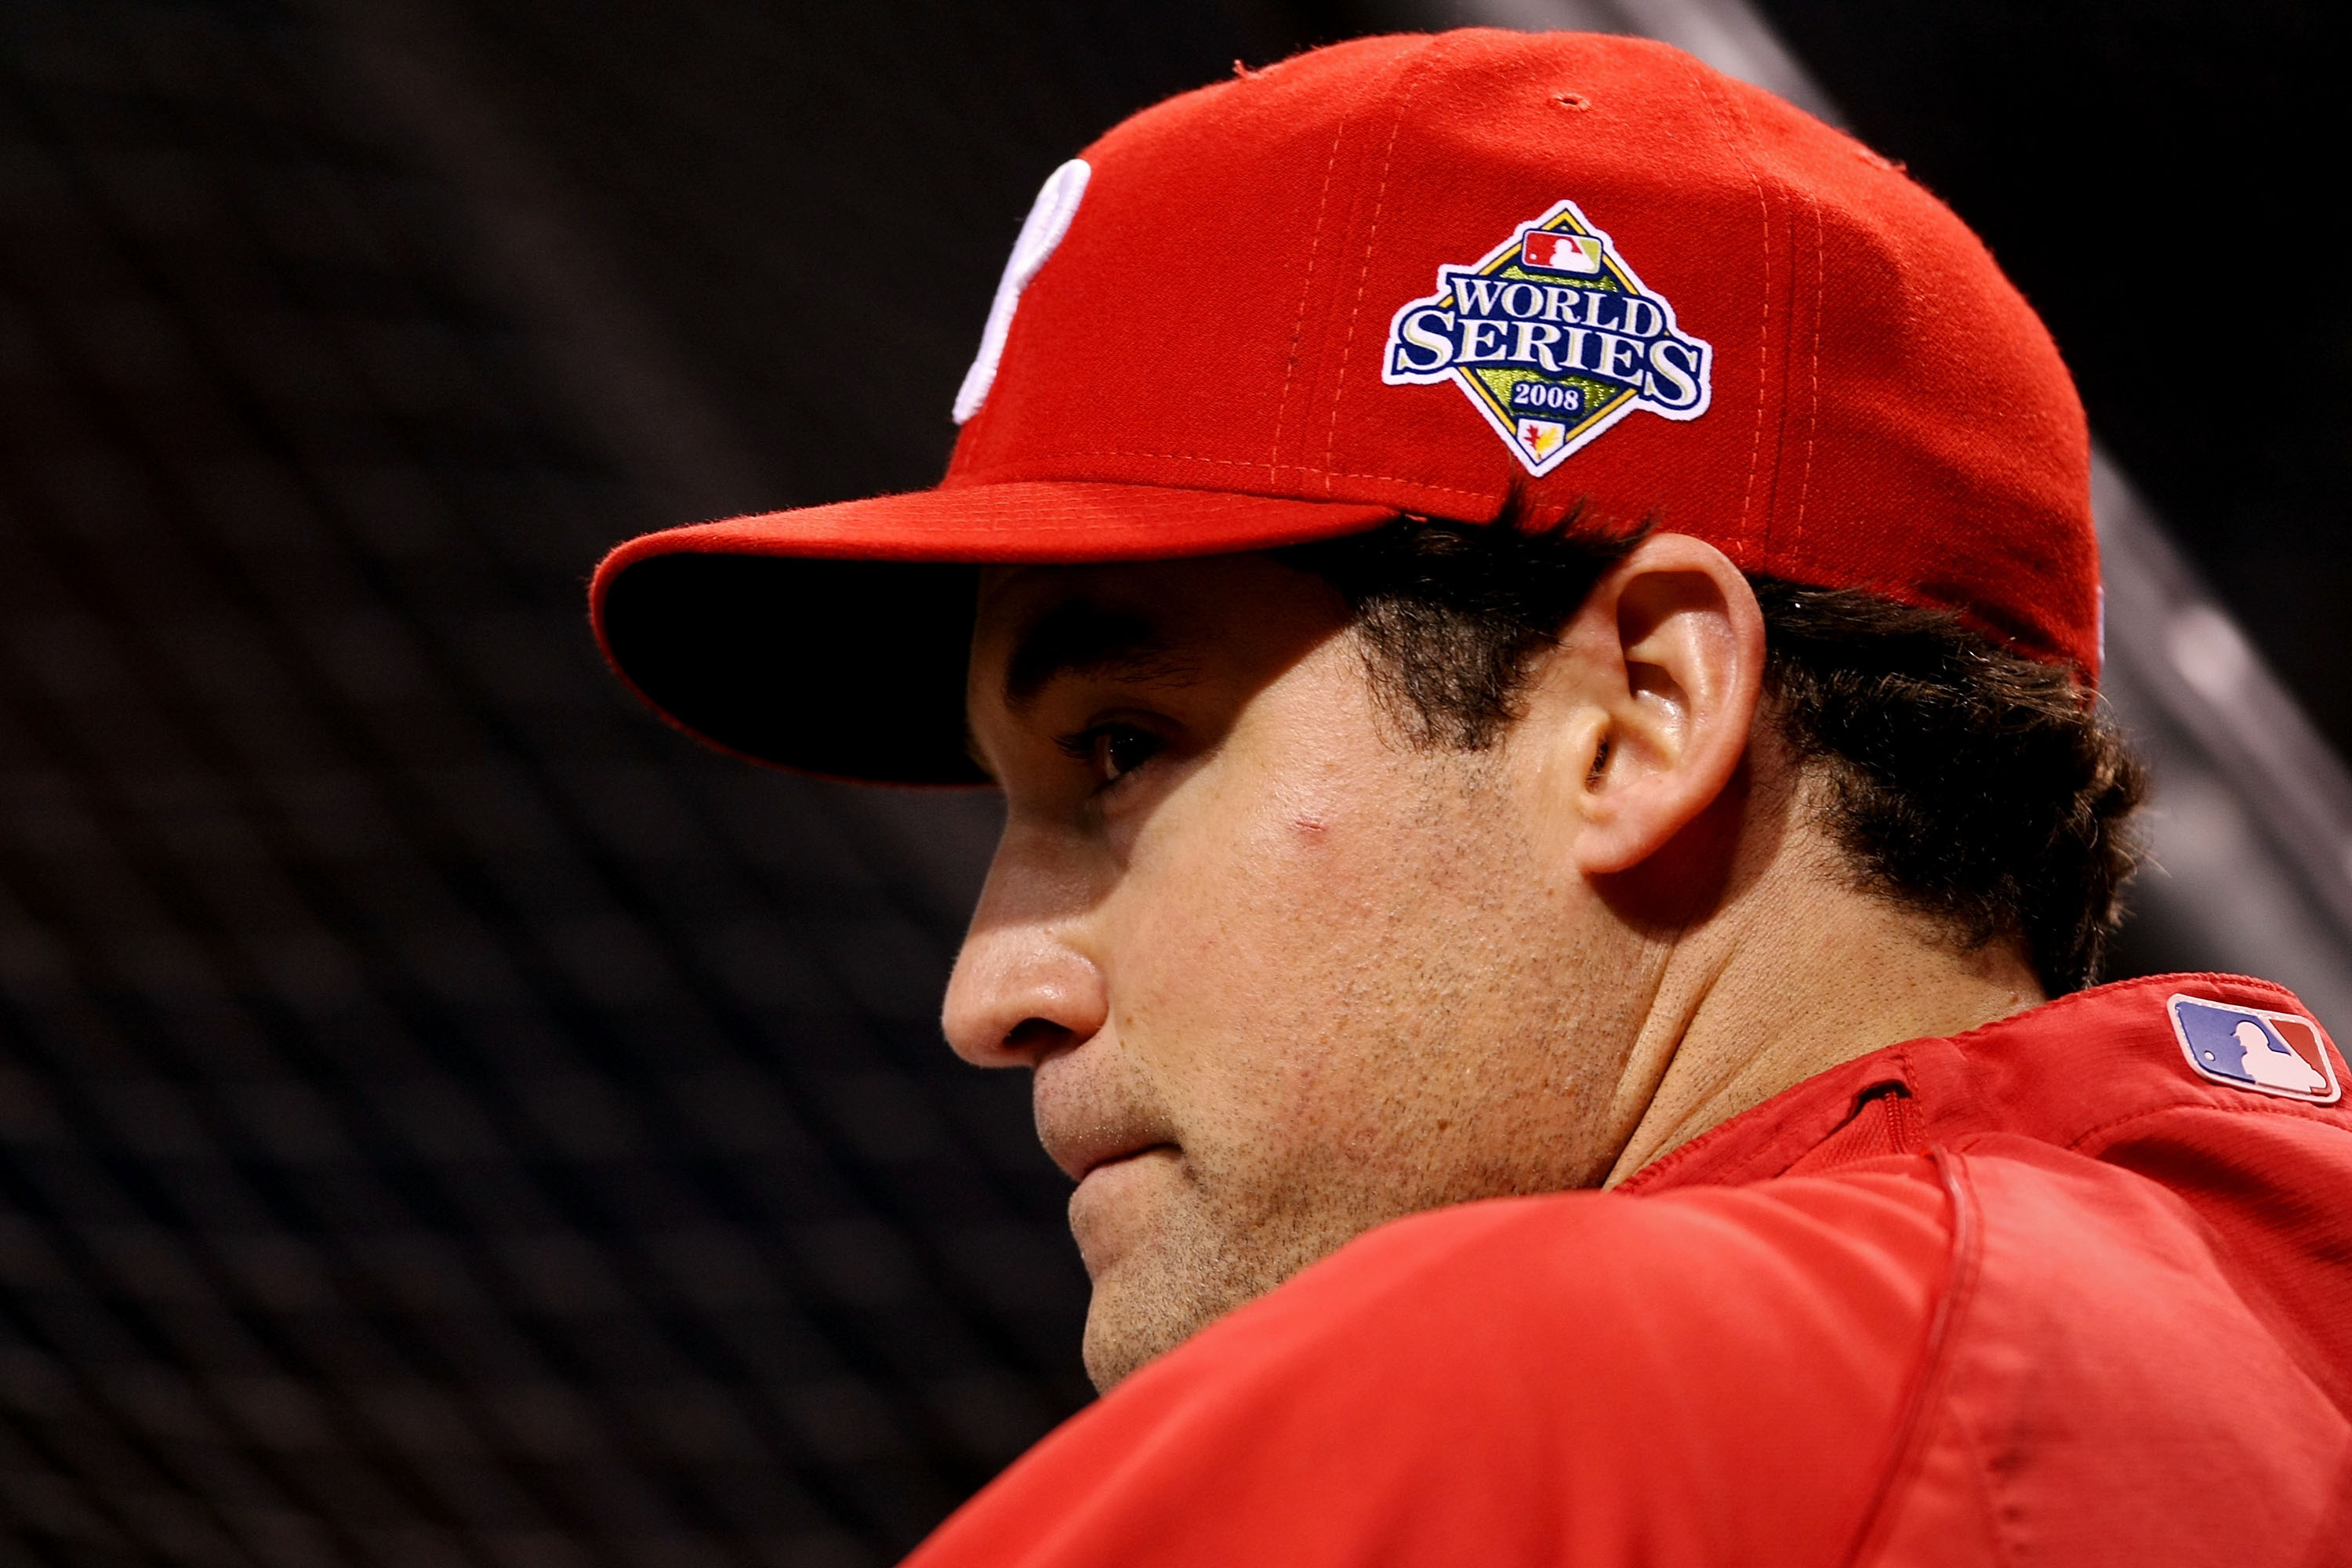 2008 Phillies: Where are they now? Pat Burrell got sober and found